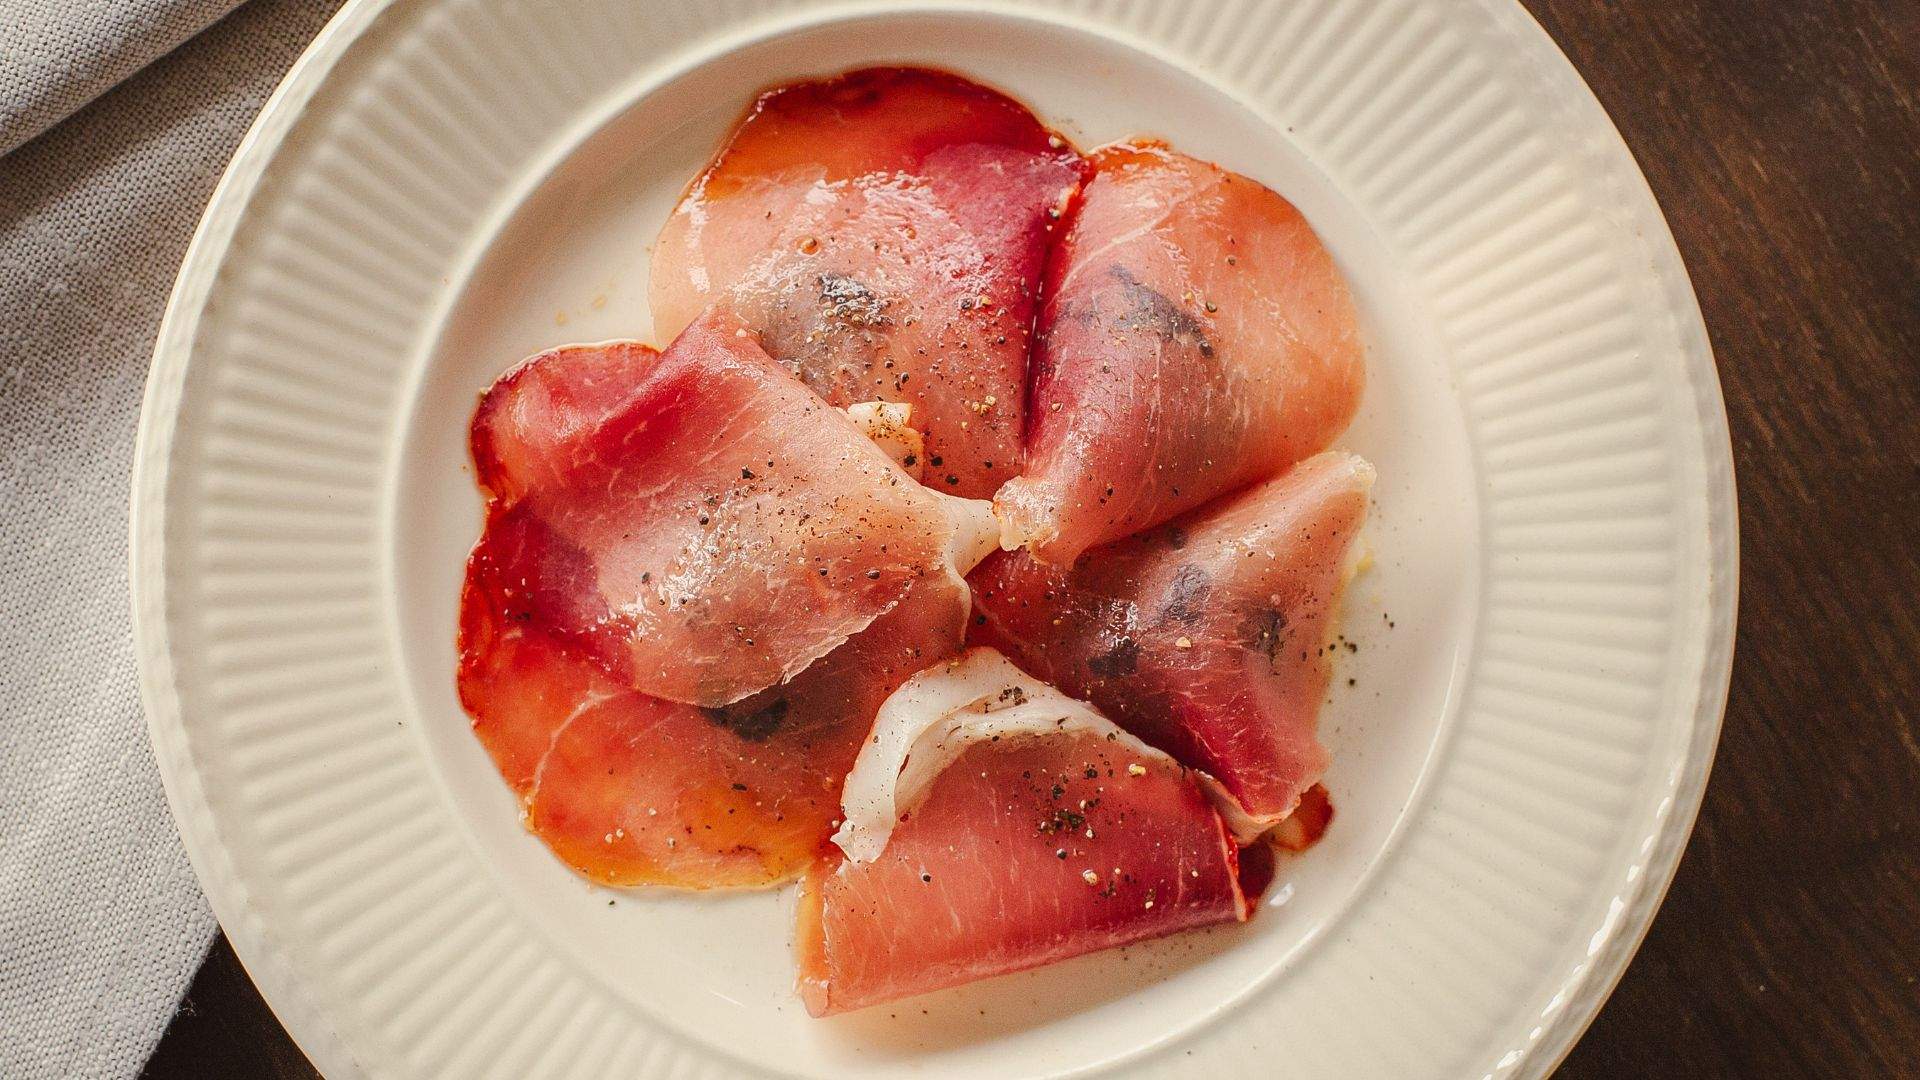 Pancetta arrotolata paired with earl grey-soaked prunes from BABS.